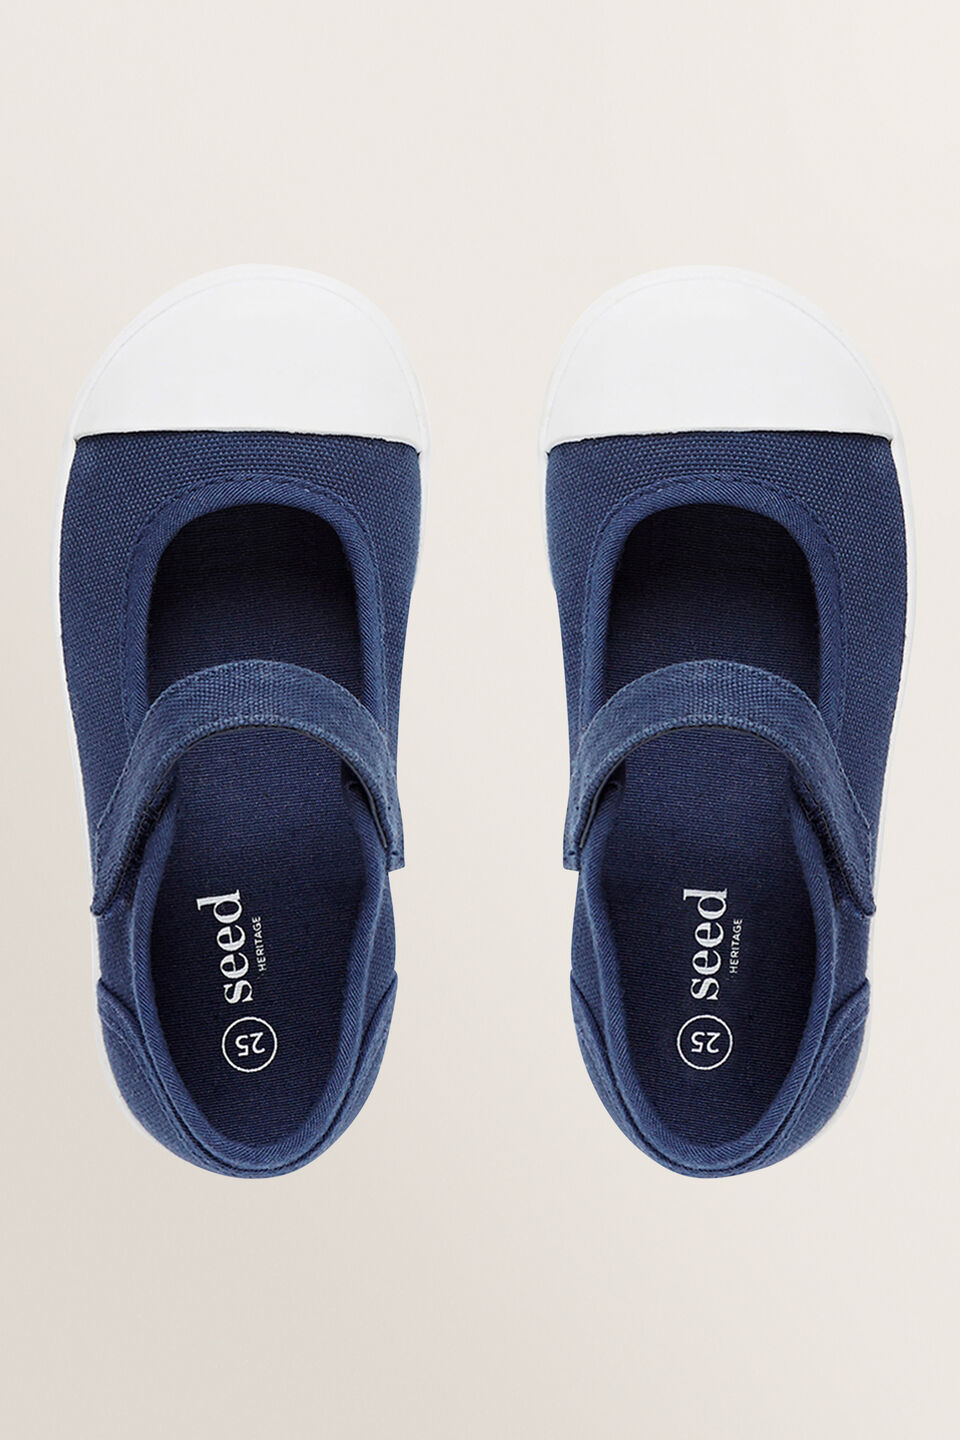 Mary Jane Canvas Shoes  Navy